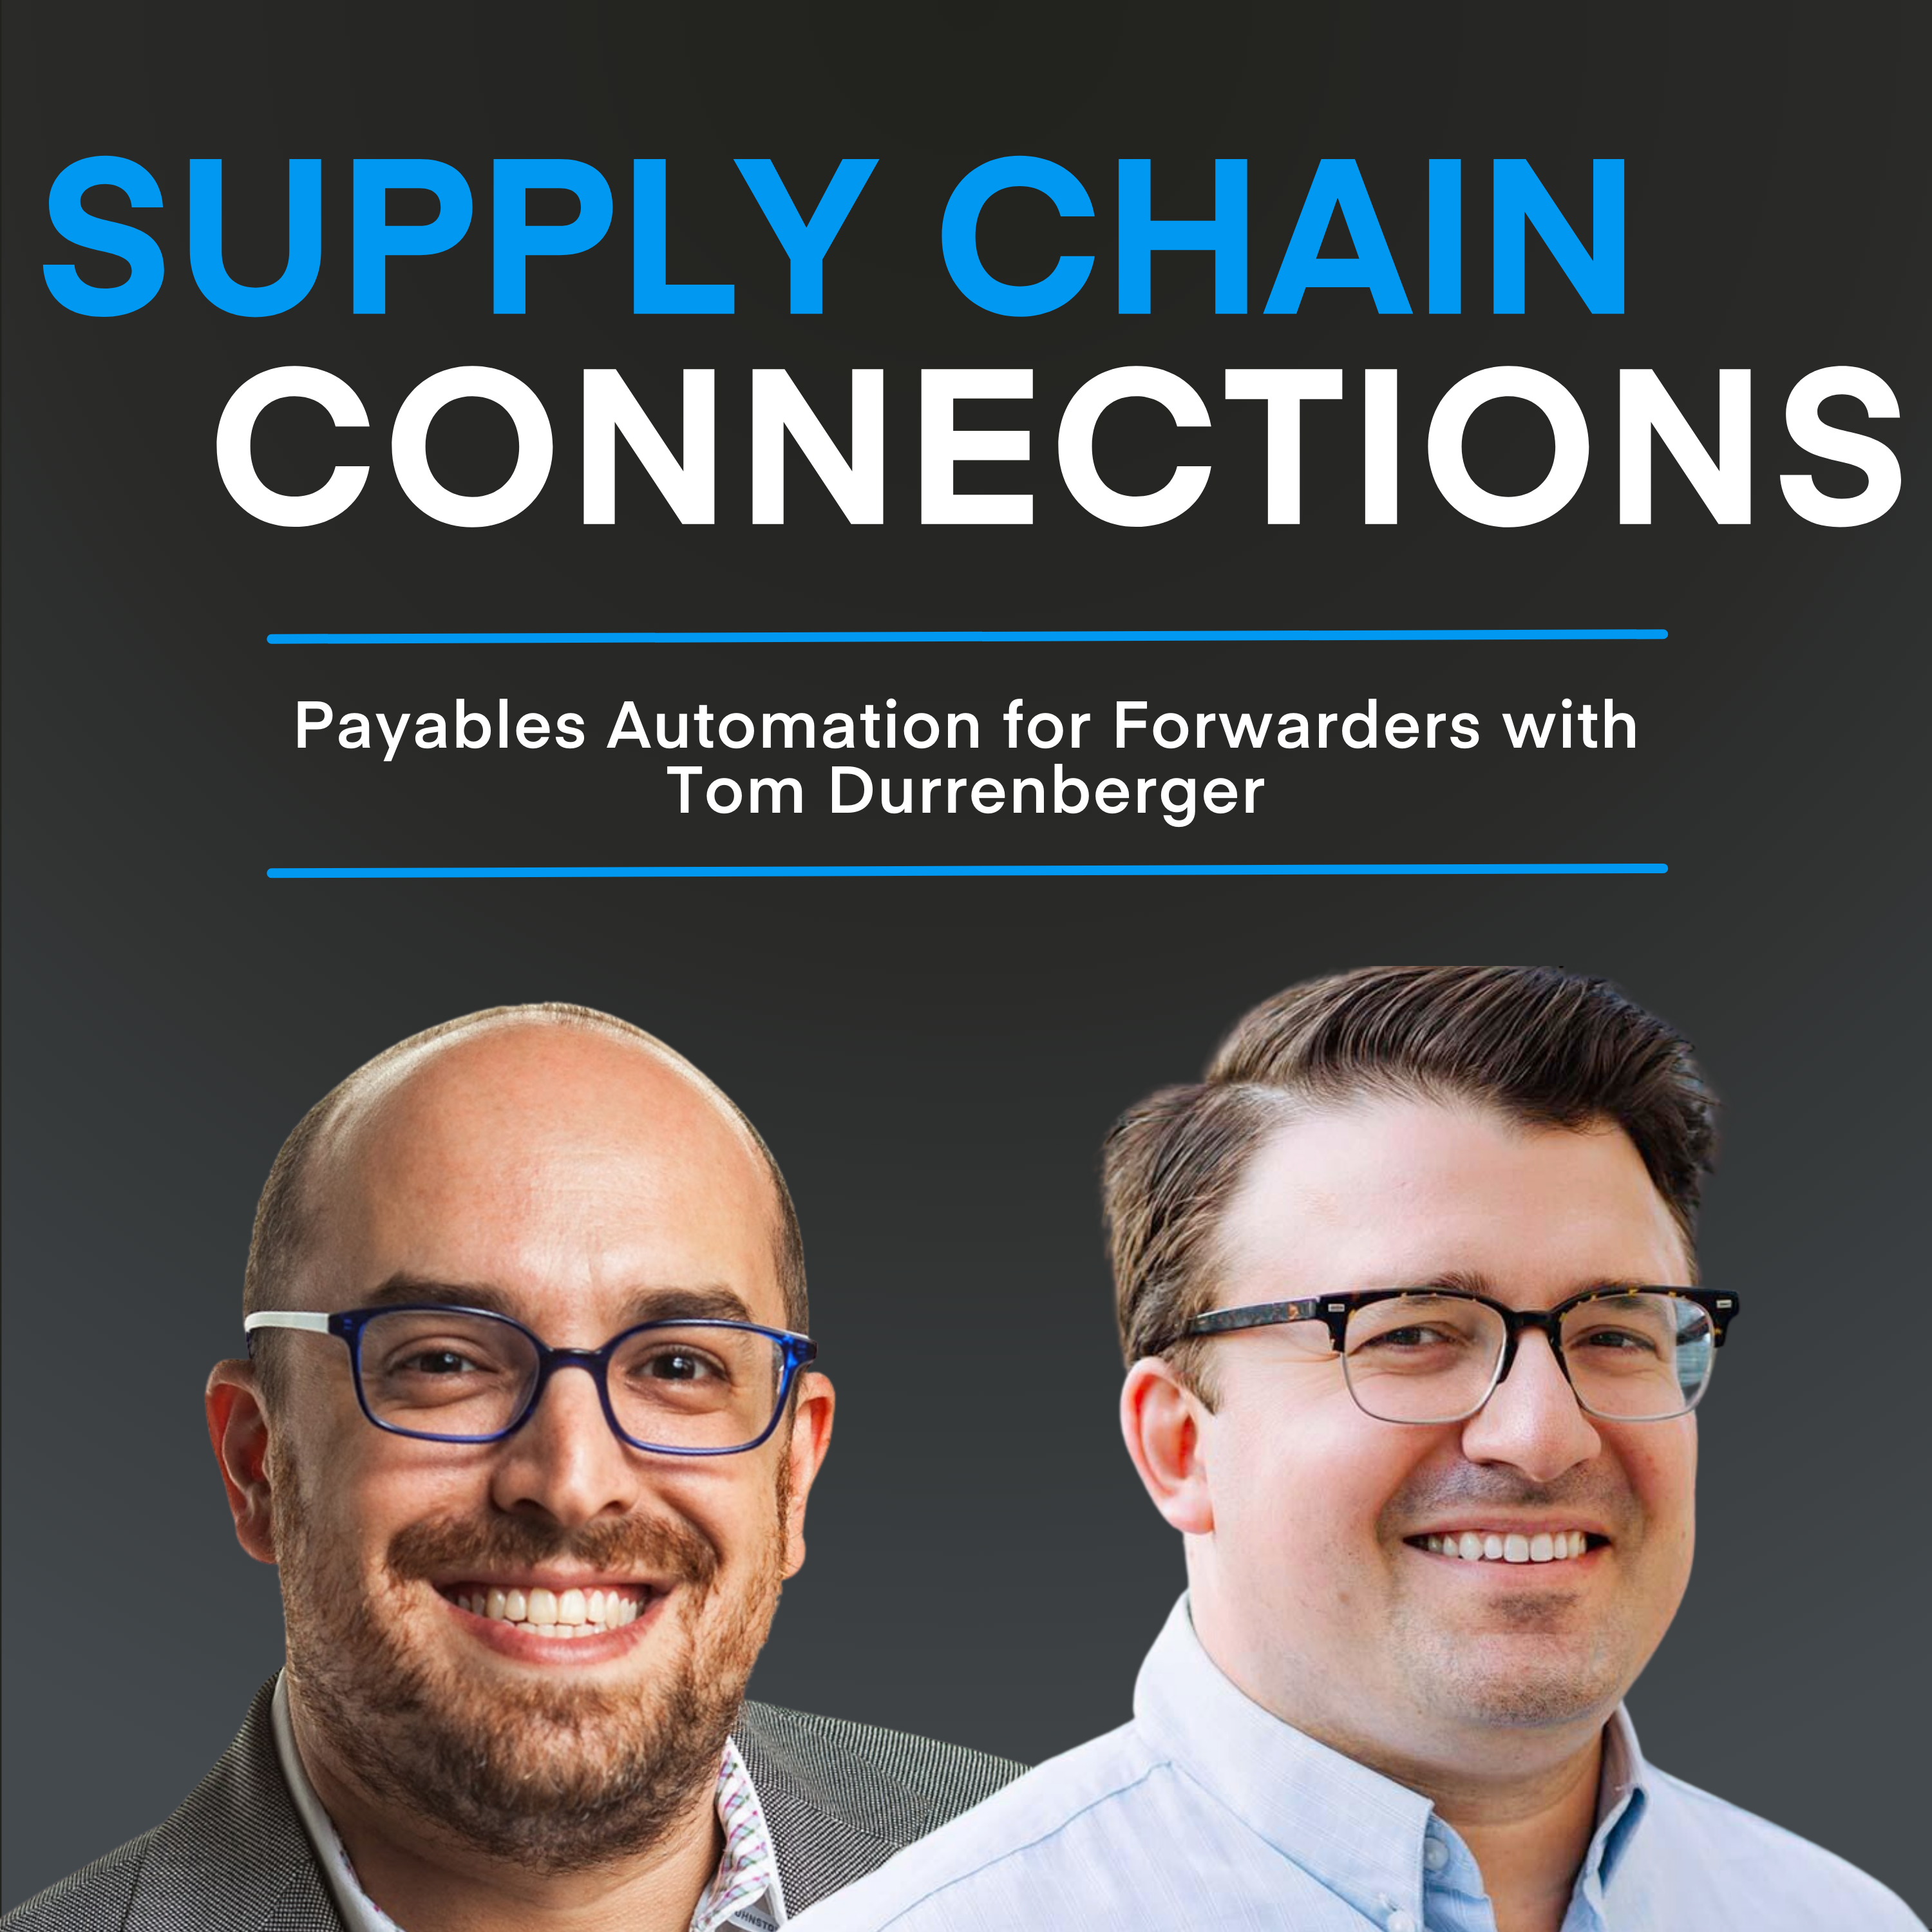 Payables Automation for Forwarders with Tom Durrenberger